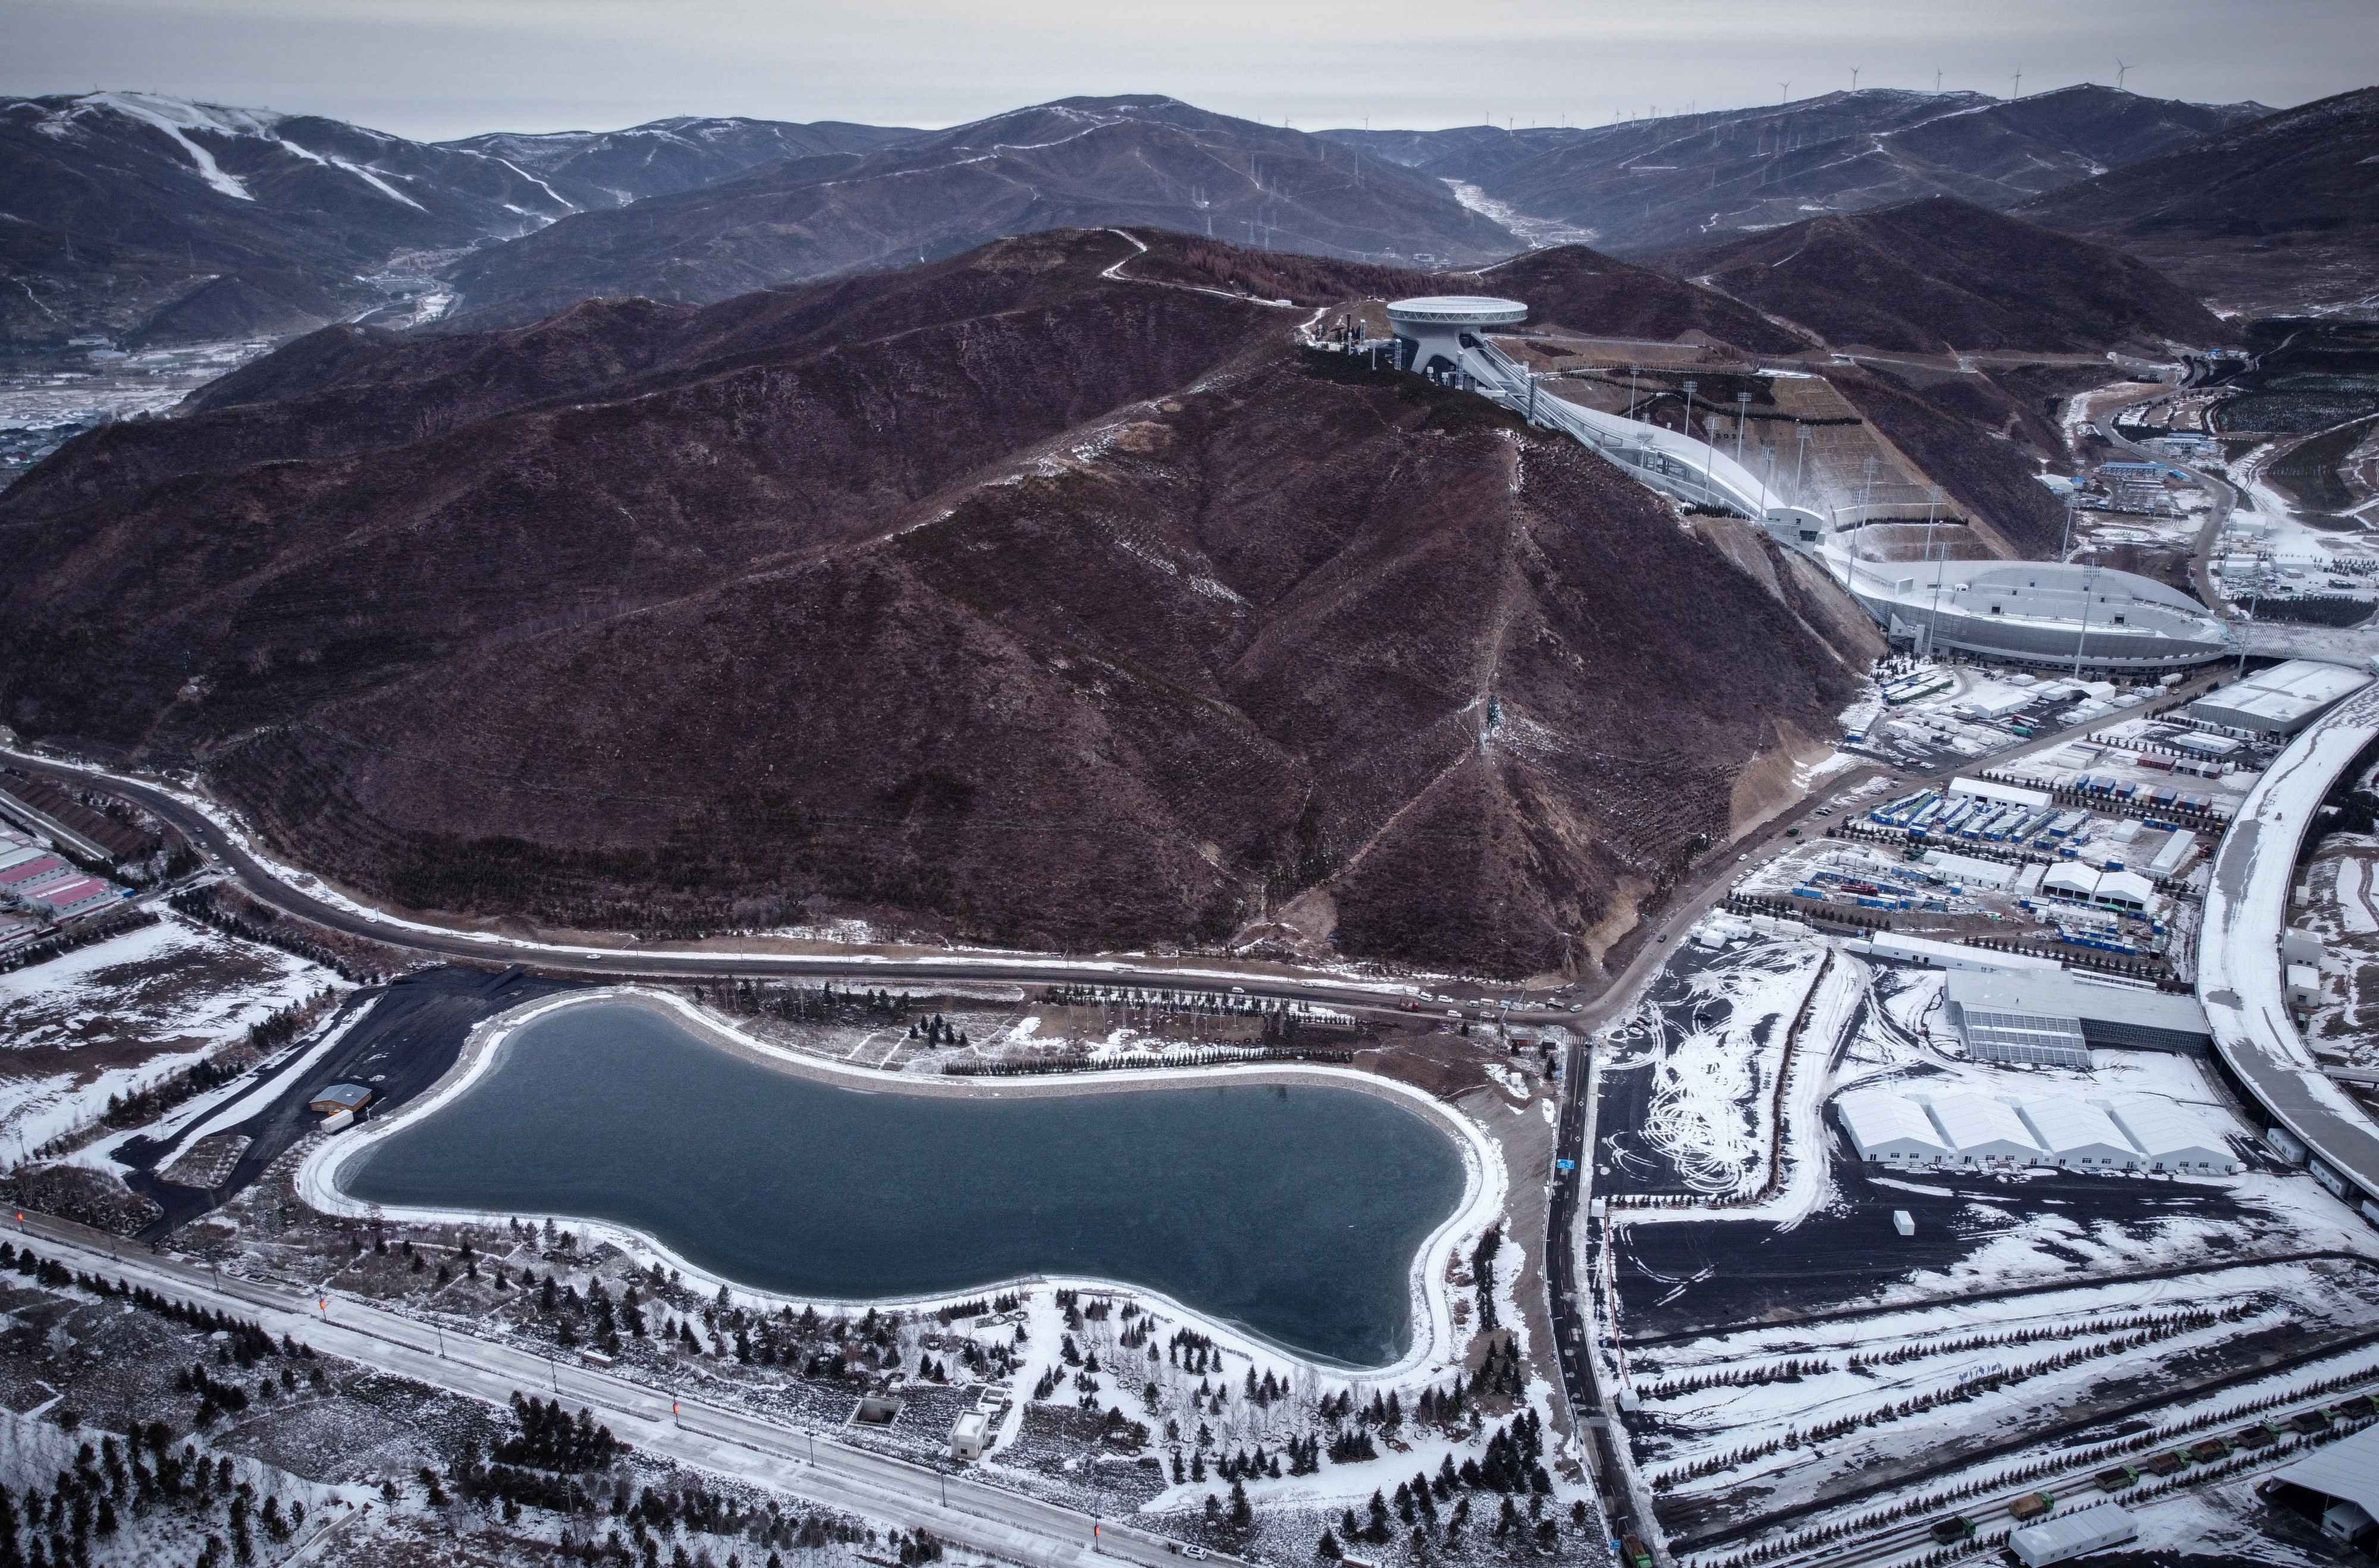 An aerial view shows a reservoir that provides water for snow guns that service competition venues of the Beijing 2022 Winter Olympics in Zhangjiakou, Hebei province, China, November 20, 2021. Pictured in the background is the National Ski Jumping Centre. Picture taken with a drone. REUTERS/Thomas Suen